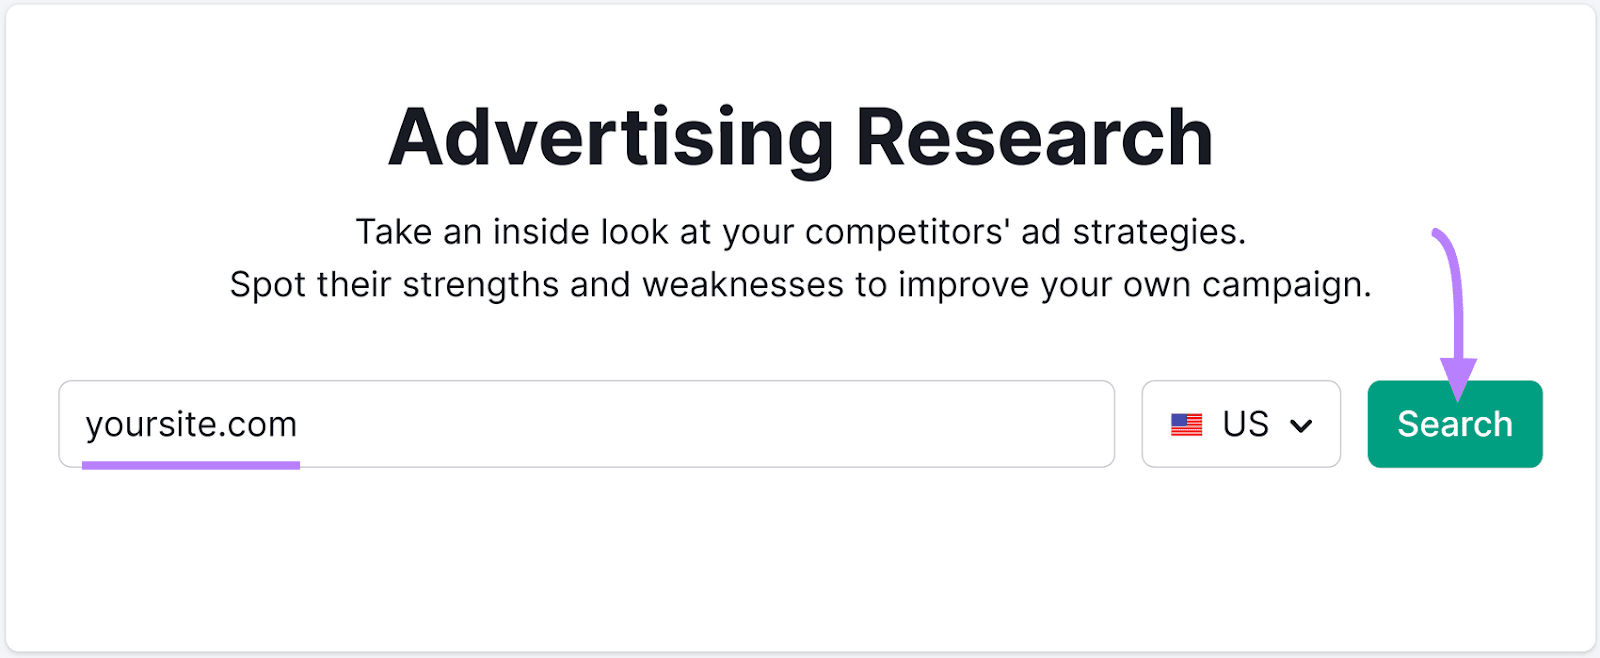 Advertising Research tool search bar